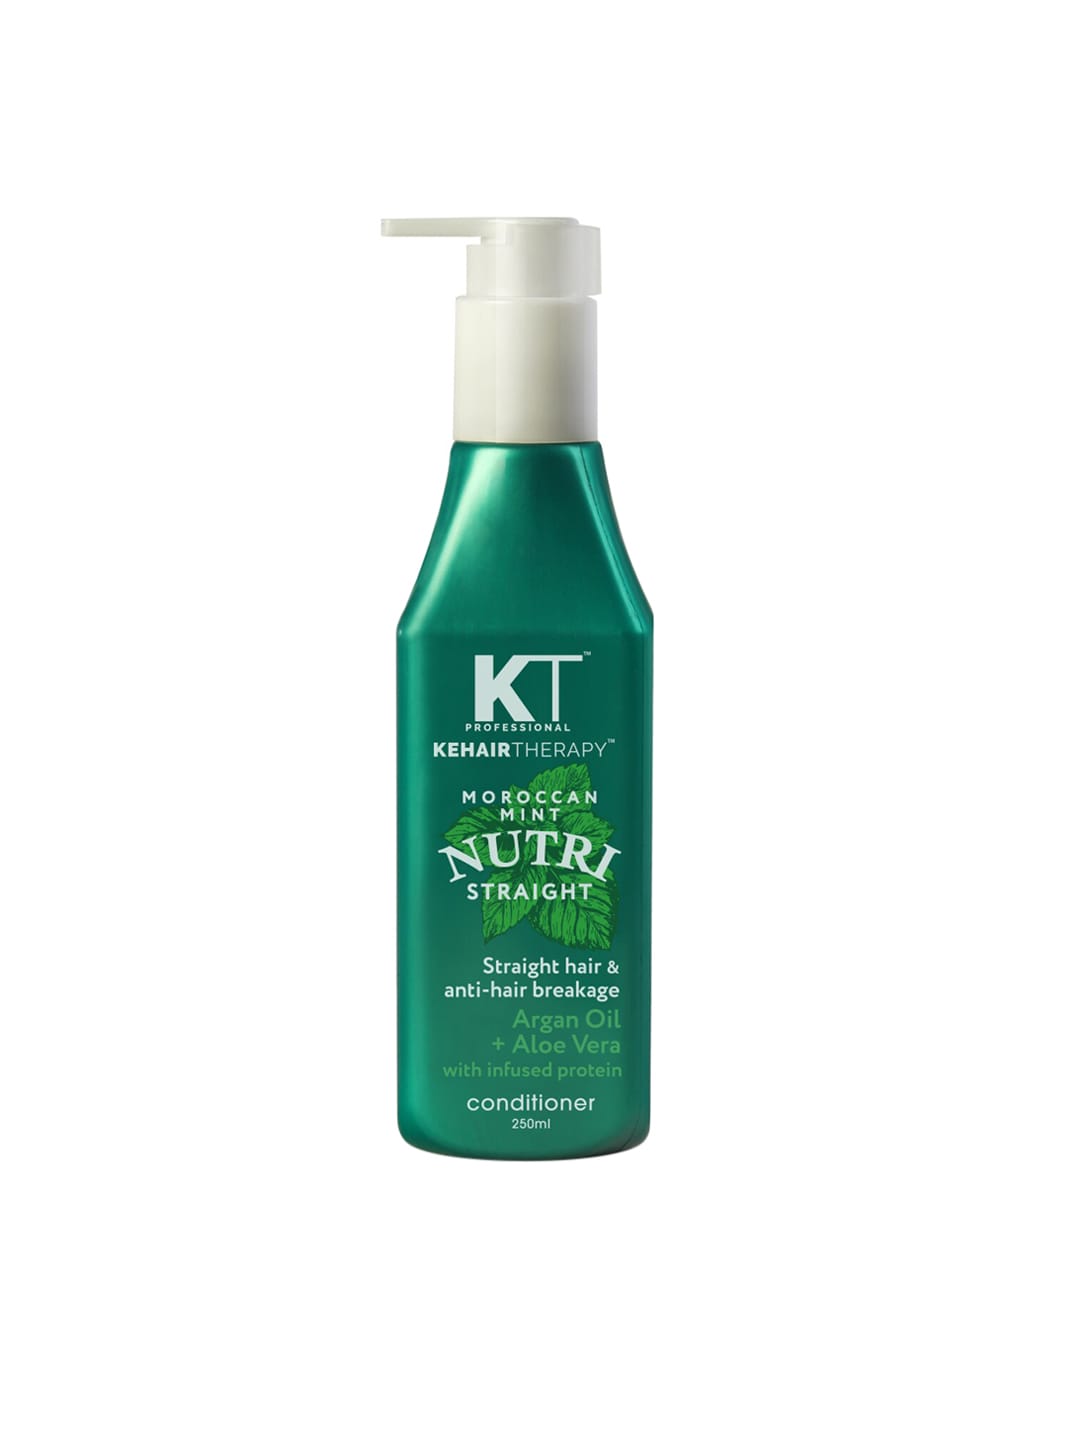 KEHAIRTHERAPY Professional Nutri Straight Conditioner 250ml Price in India